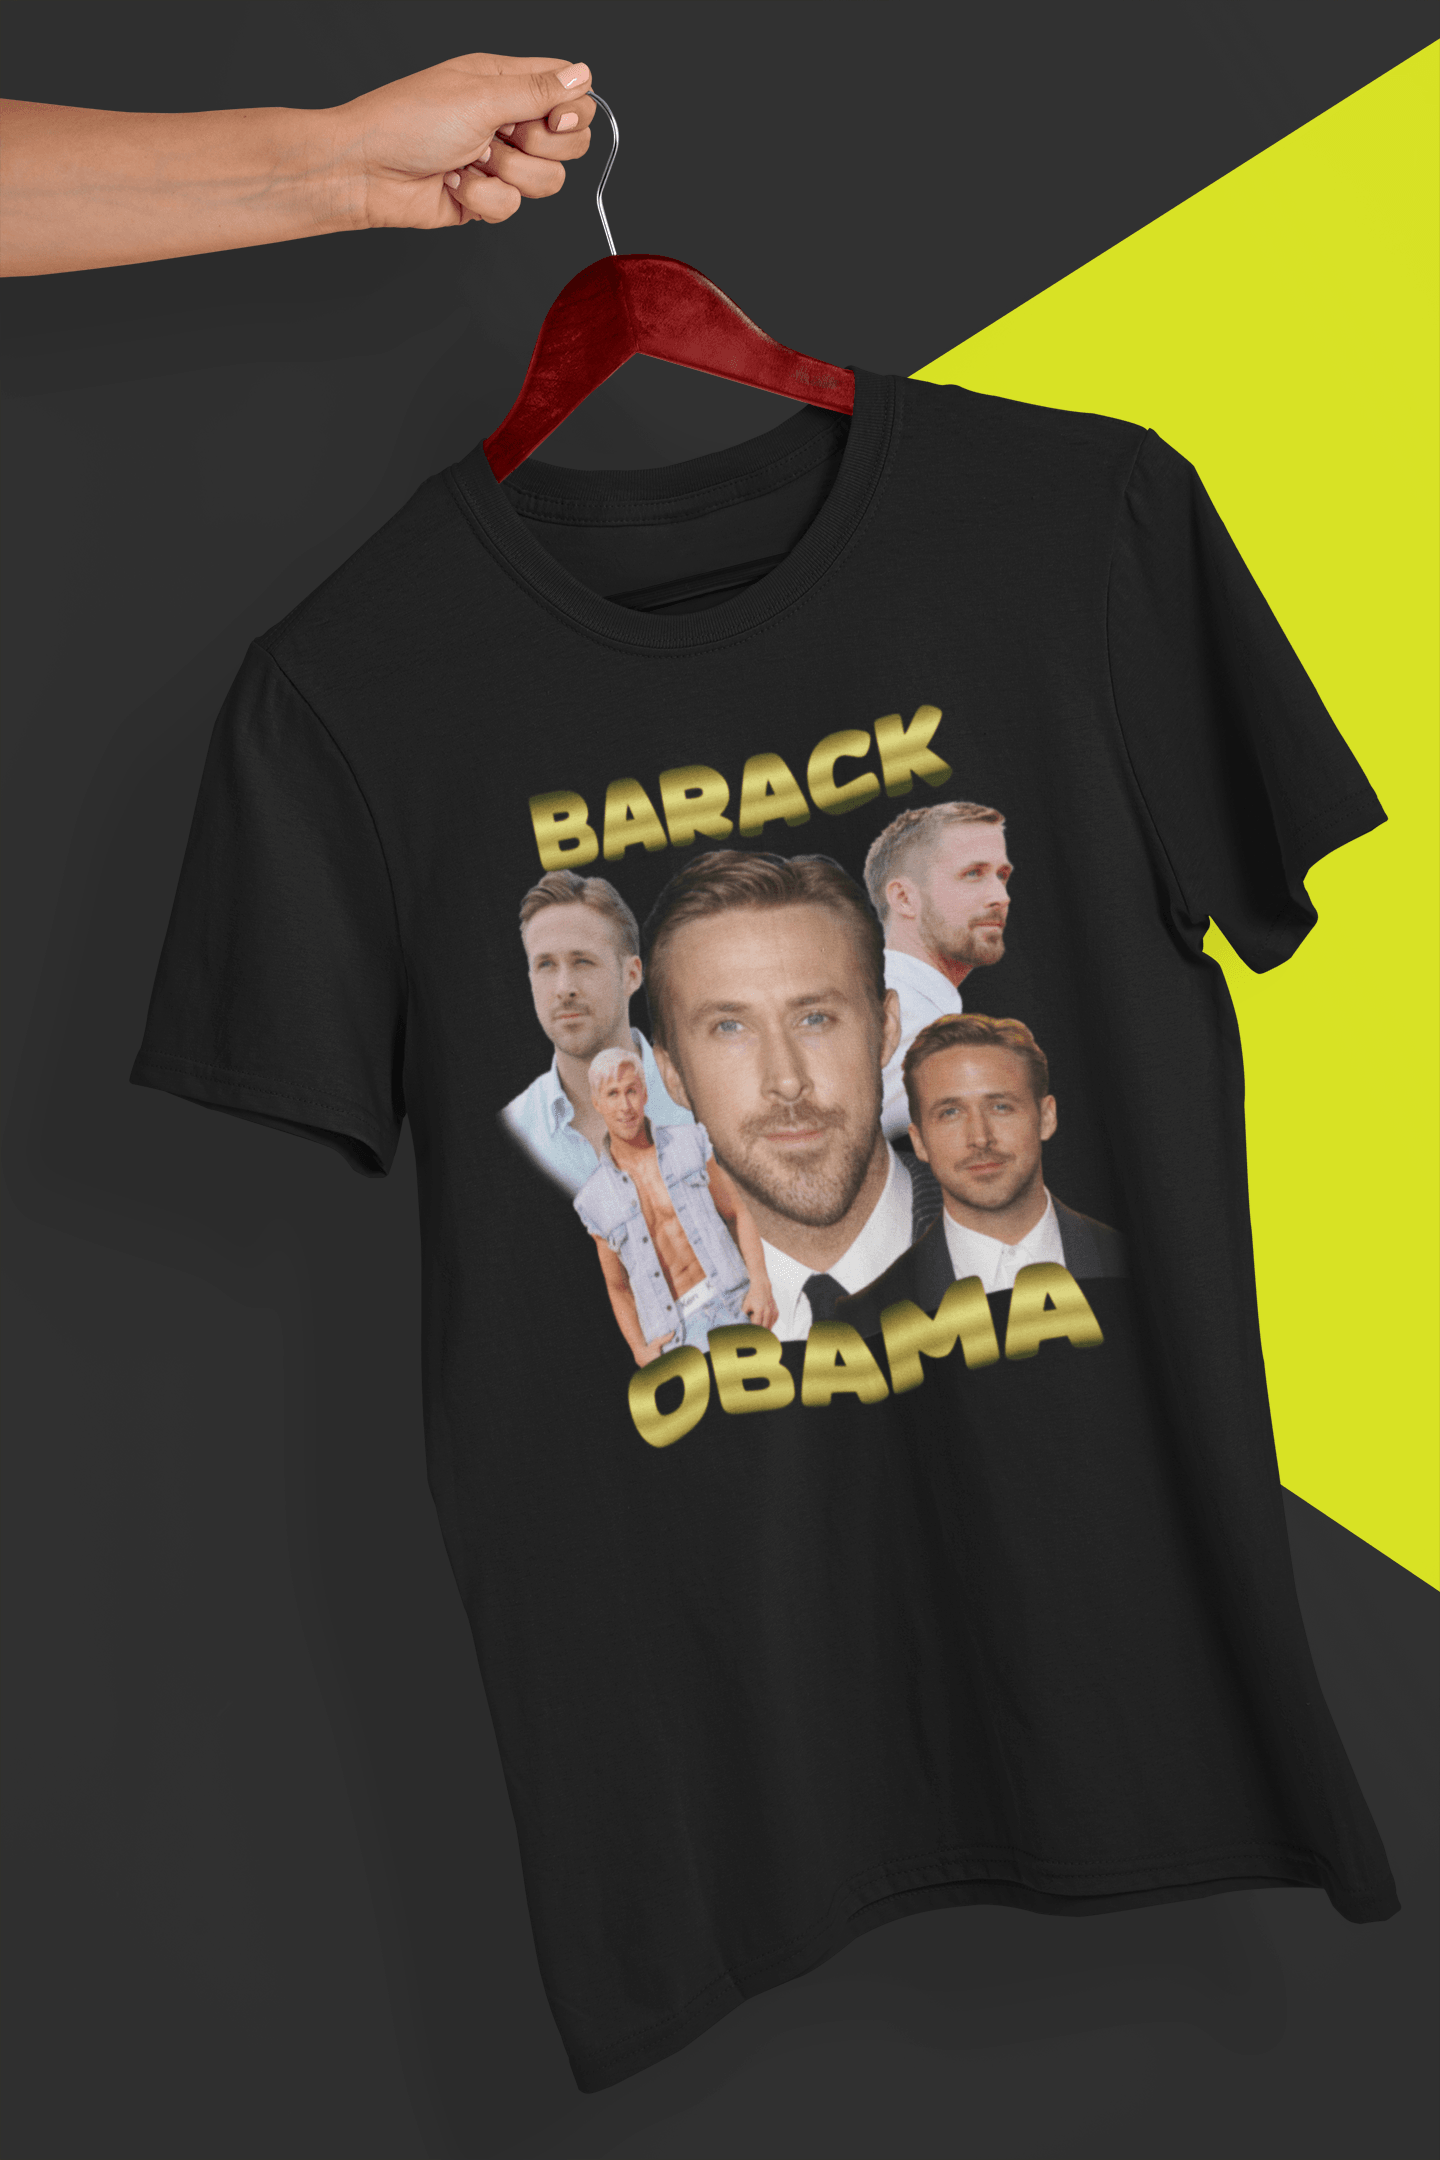 A black T-shirt with the actor Ryan Gosling written &quot;Barack Obama&quot;. is hung on a red hanger, held by a hand against a split black and yellow background.